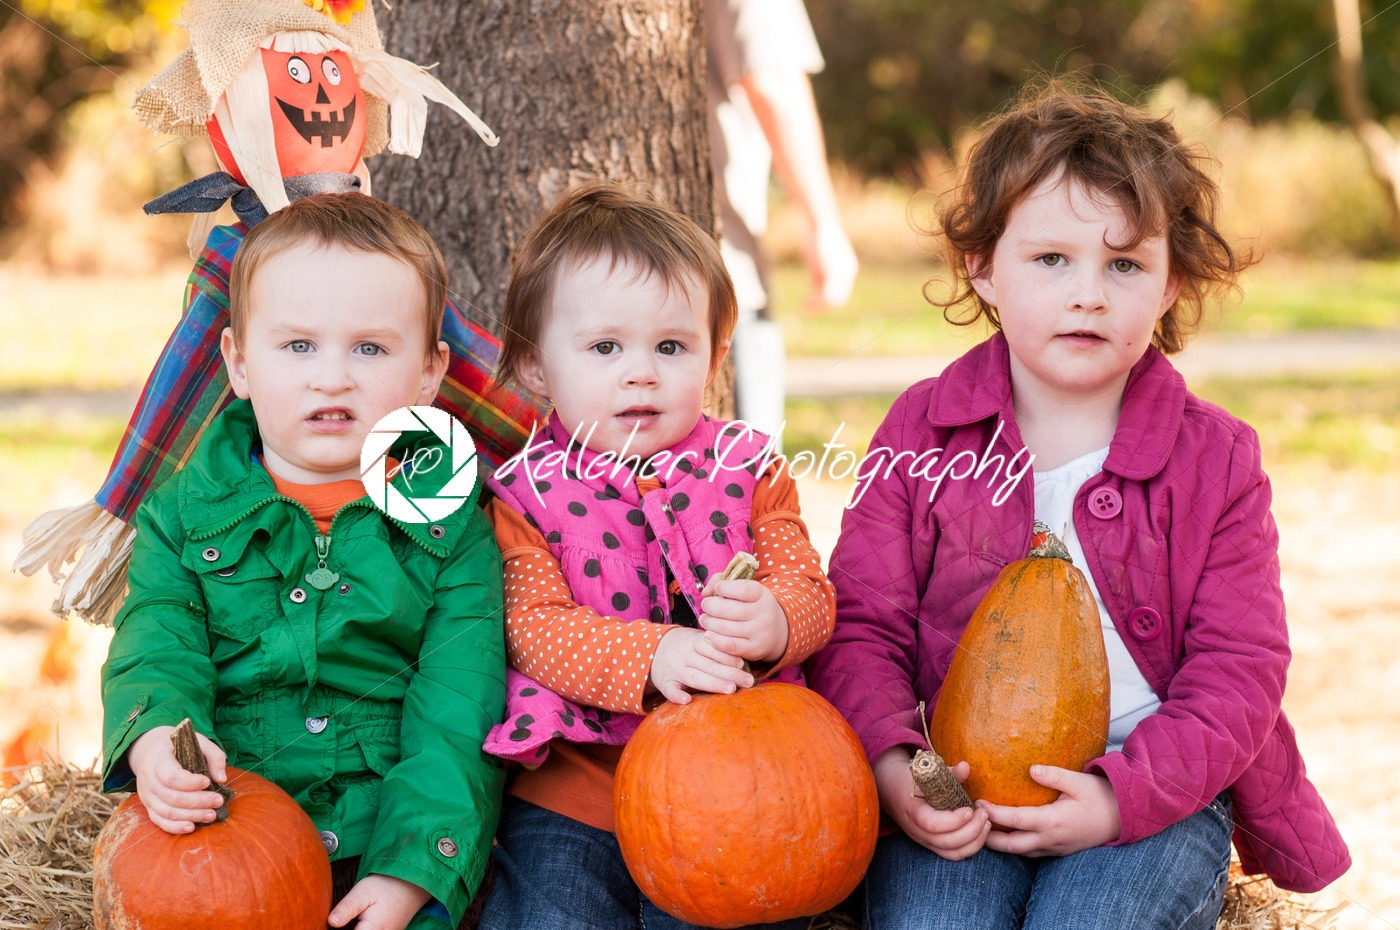 Young siblings outside holding a pumpkin with pumpkin fields in the background - Kelleher Photography Store